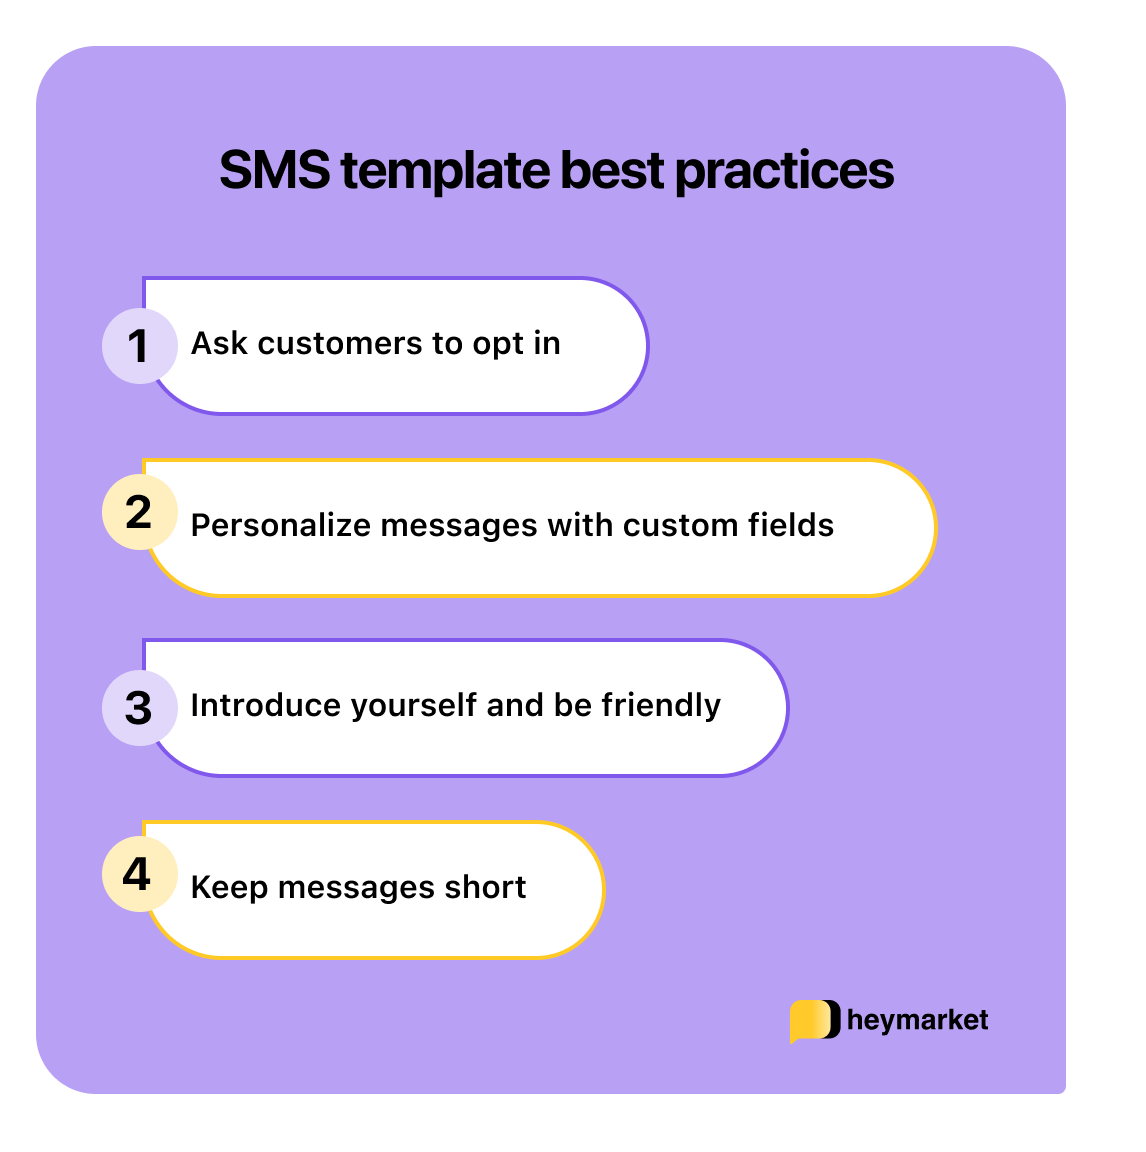 List of best practices for sending SMS templates